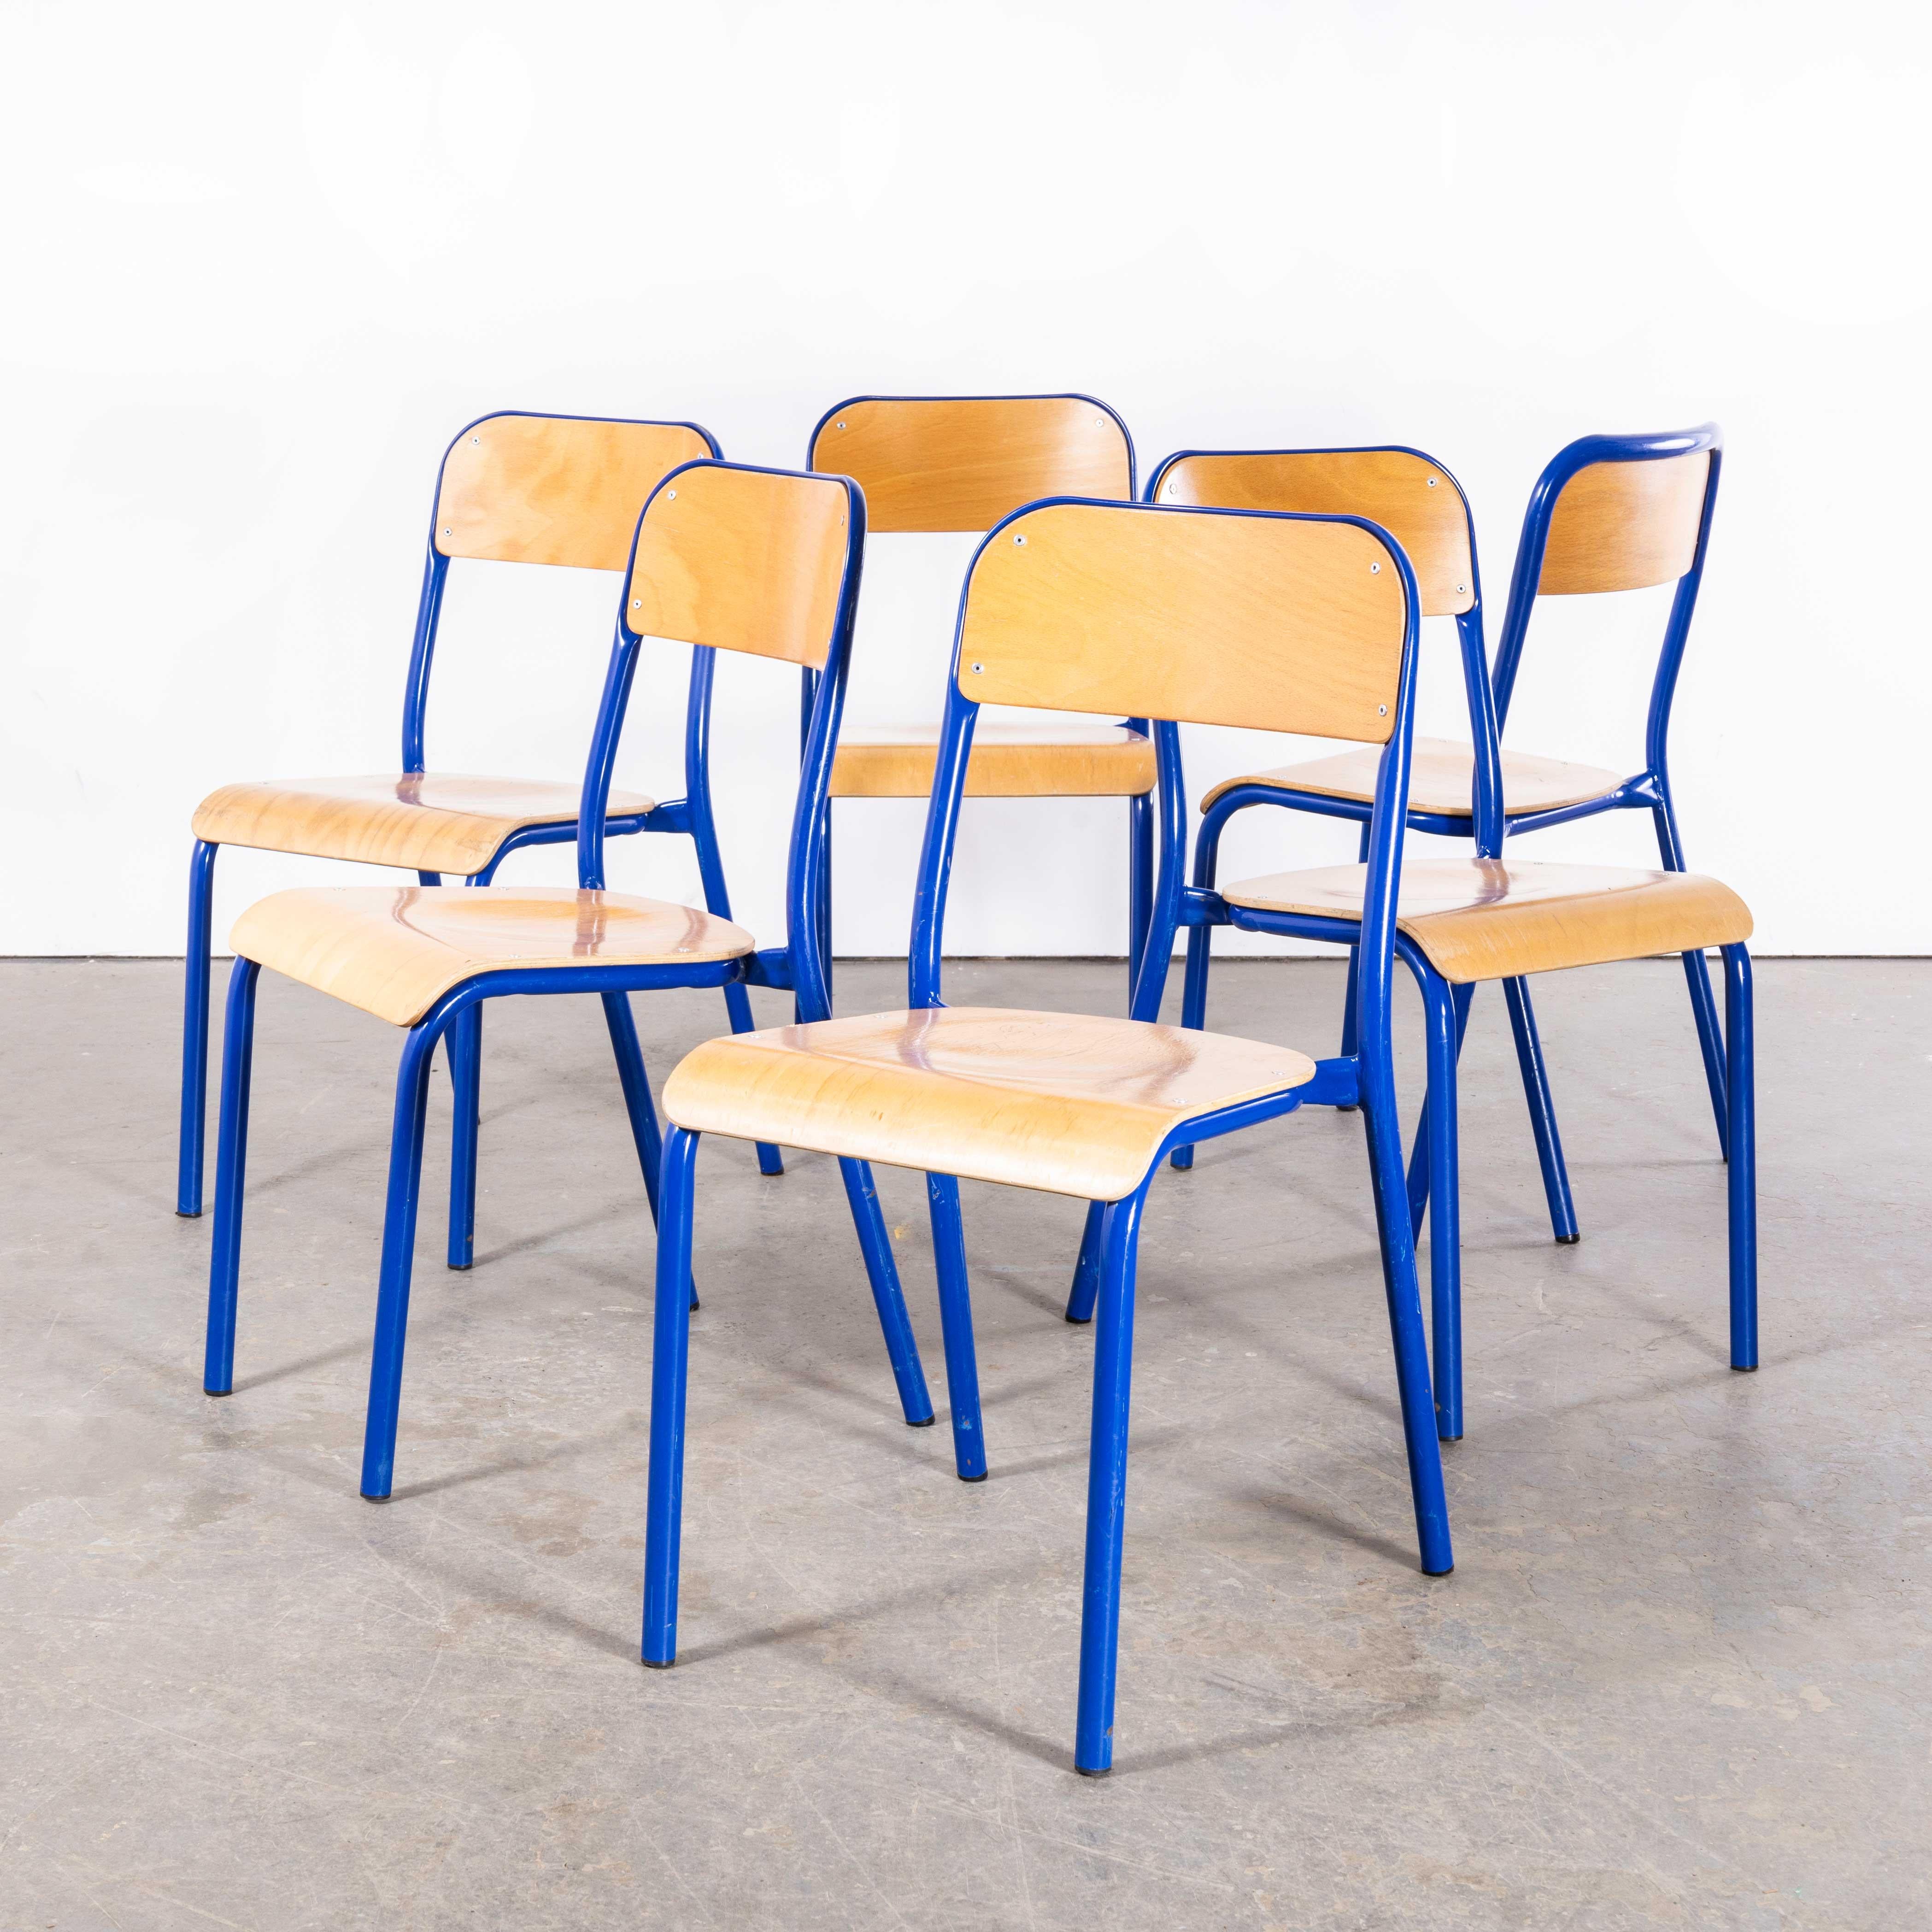 1970’s French Mullca Stacking D Back Dining Chair – Blue – Set Of Six
1970’s French Mullca Stacking D Back Dining Chair – Blue – Set Of Six. One of our most favourite chairs, in 1947 Robert Muller and Gaston Cavaillon created the company that went